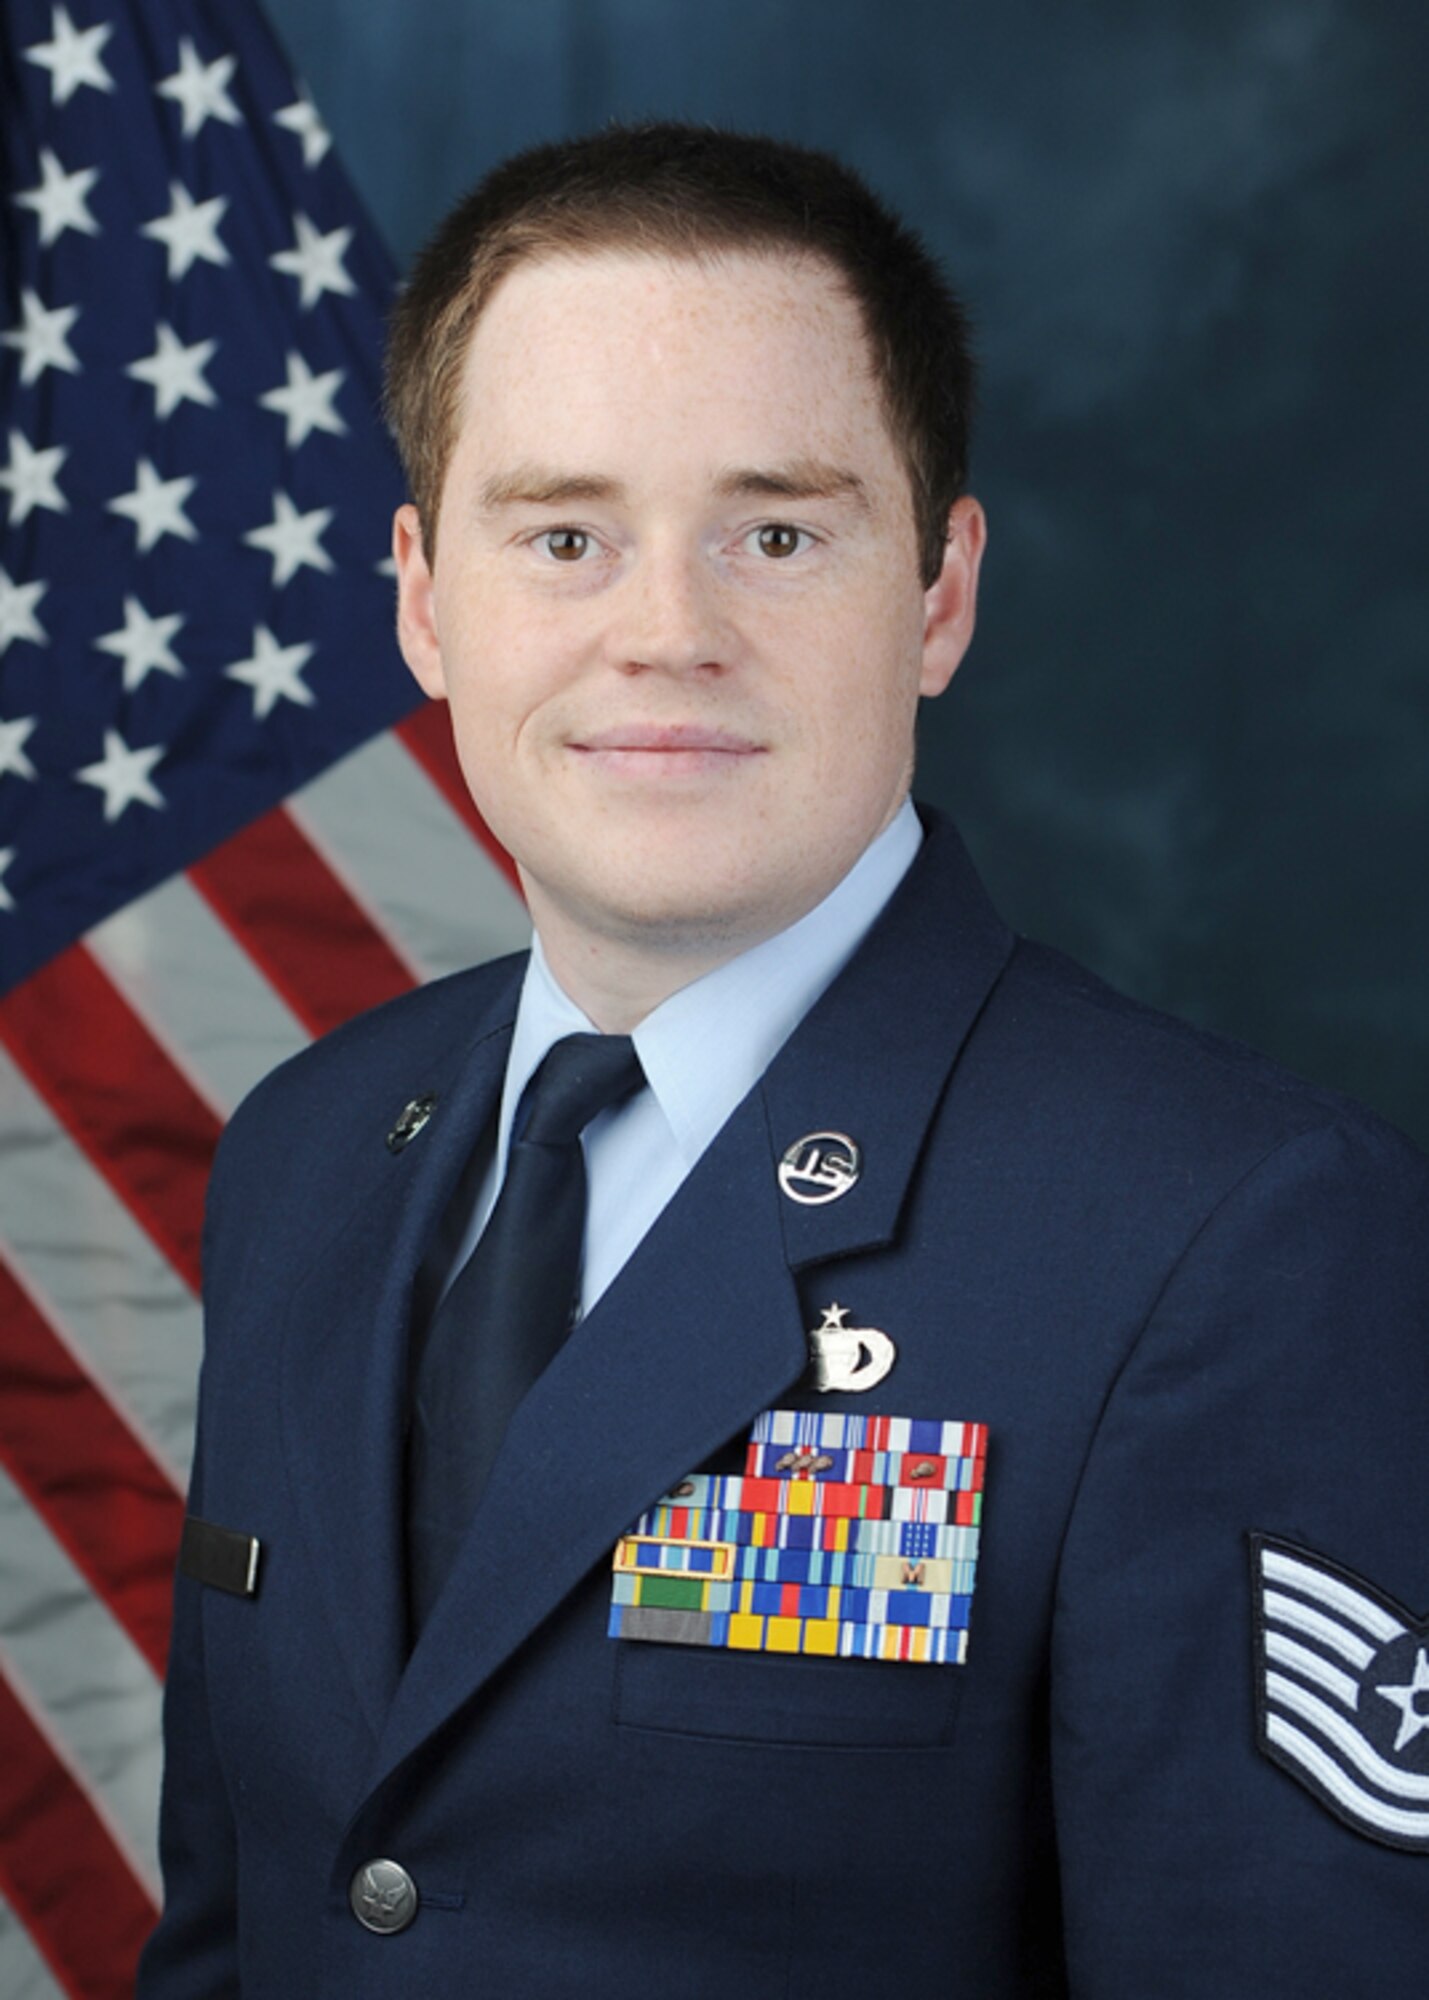 Tech. Sgt. Jon, Virginia Air National Guard-192nd Intelligence Squadron, earns the enlisted gold award for Geospatial Analyst, Nov. 2, 2016 at 25th Air Force Headquarters, Joint Base San Antonio-Lackland, Texas.